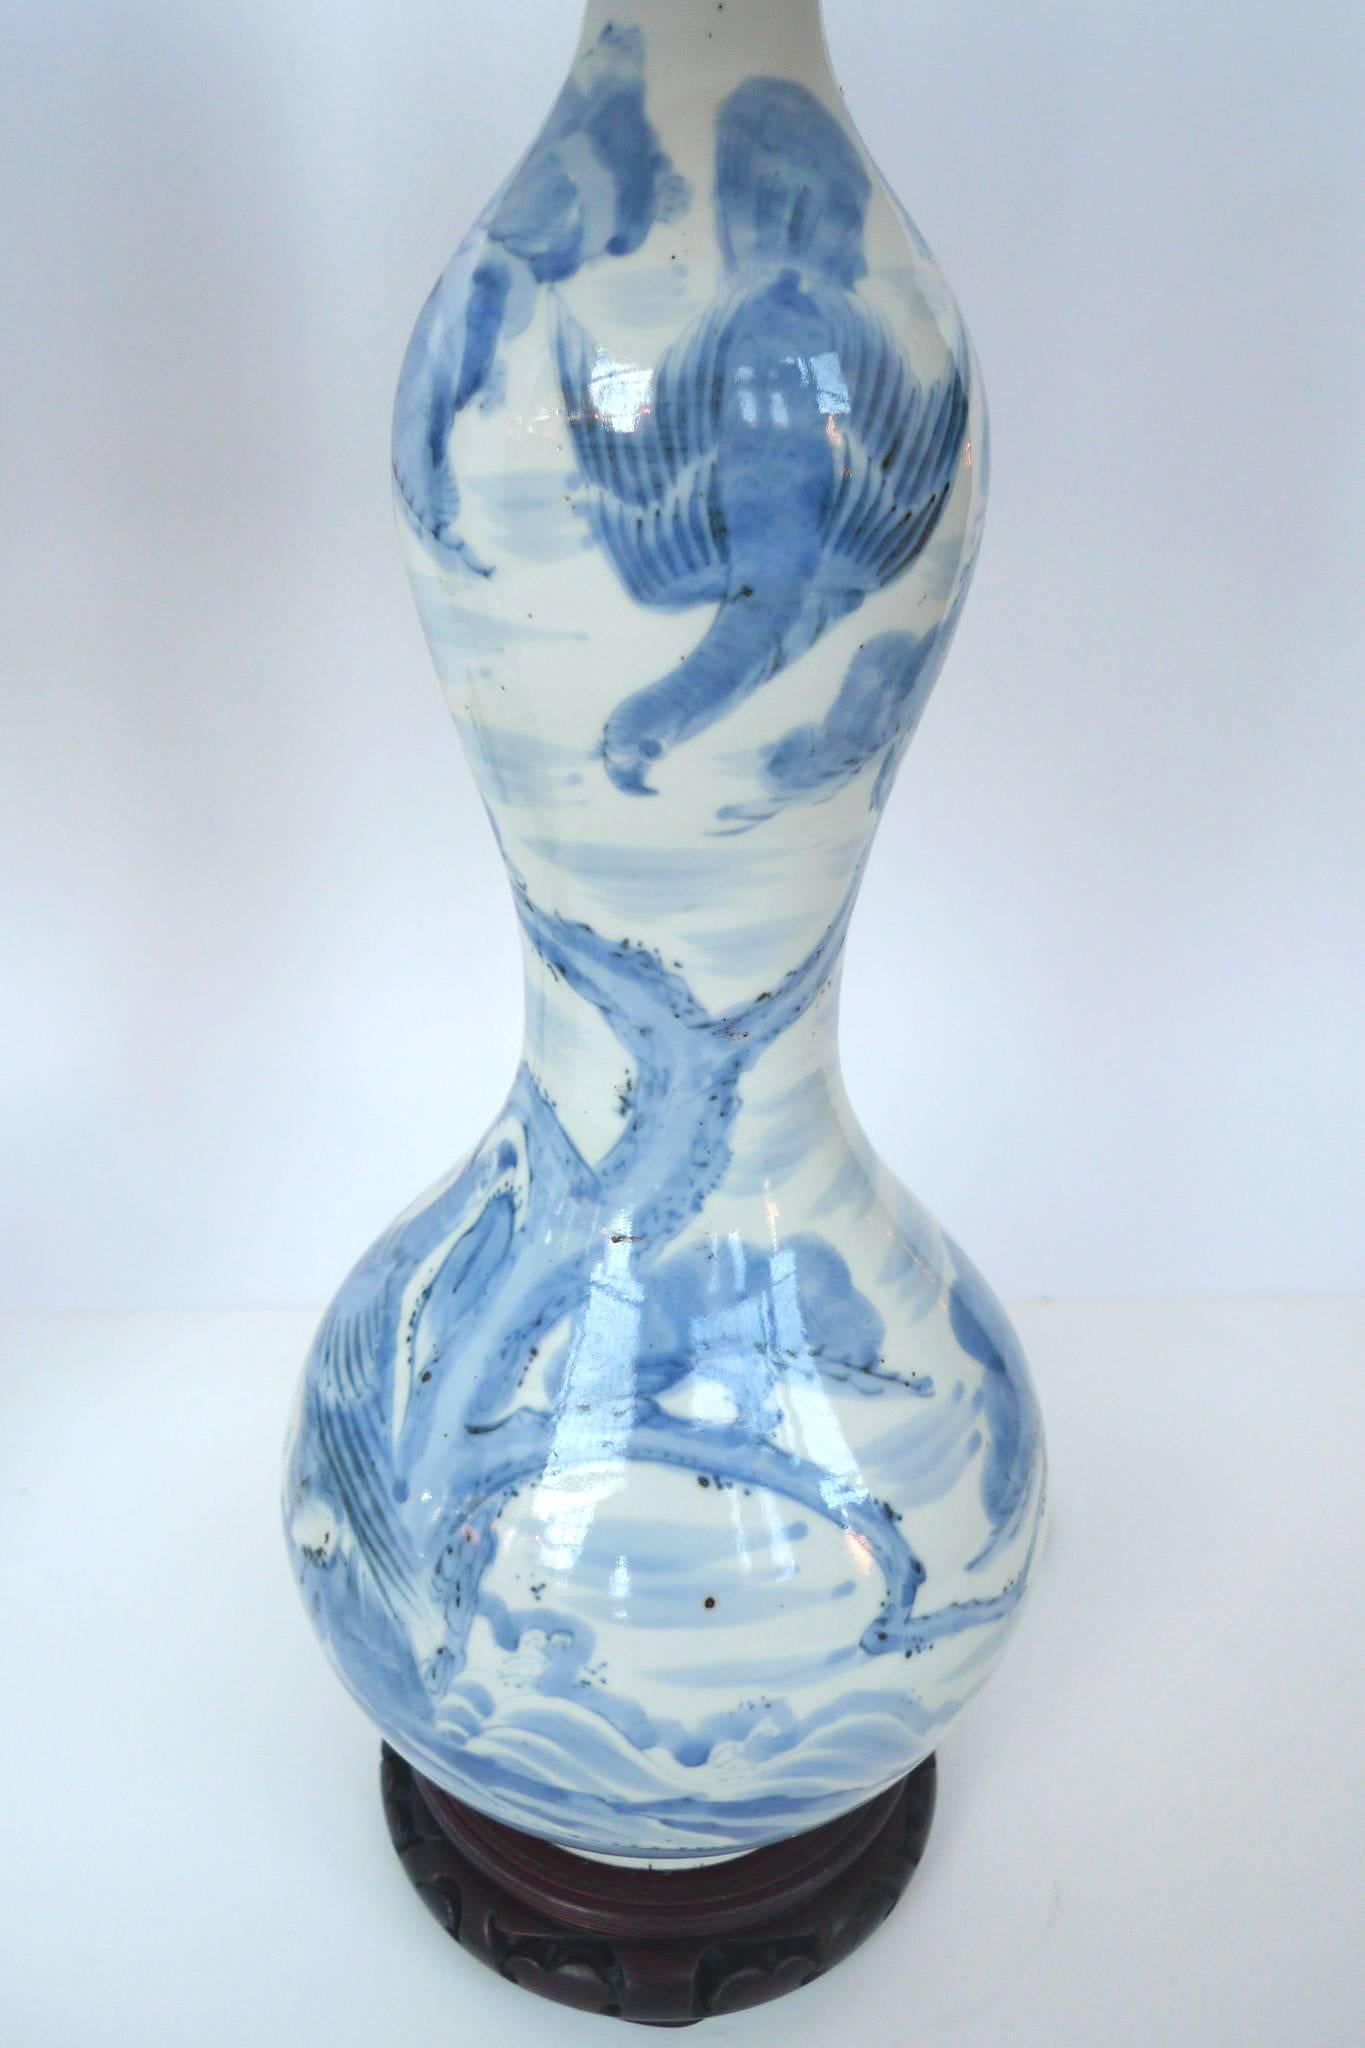 These gourd vase lamps are ceramic. They are paired with new silk-lined parchment shades in a round taper. The vases are beautifully hand-painted in a blue-and-white design of a pastoral landscape. While the vases are 19th century, the rosewood